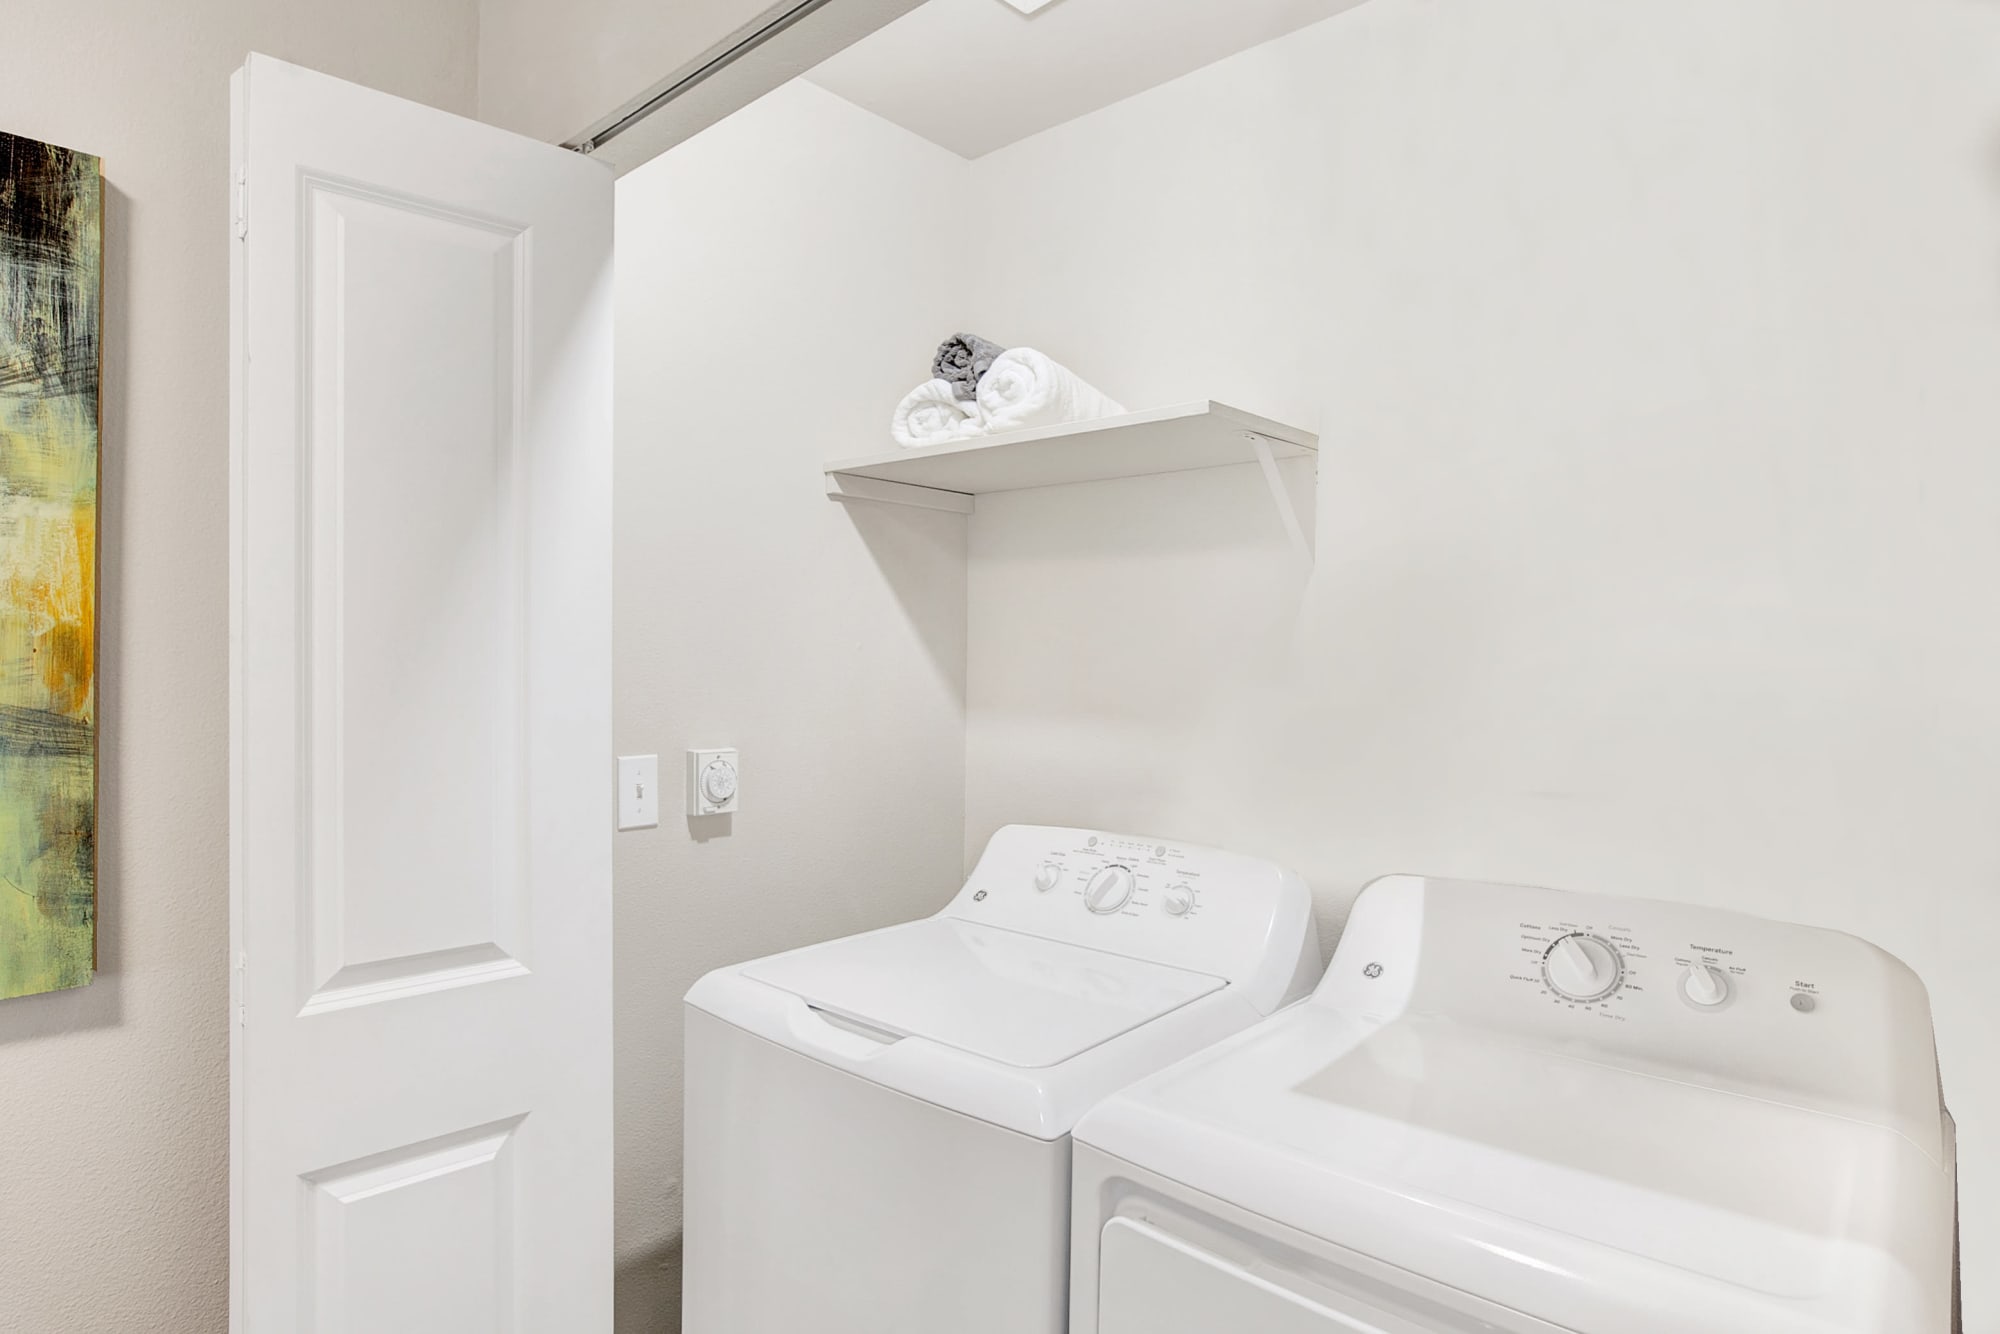 Washer and dryer at Pebble Cove Apartments in Renton, Washington